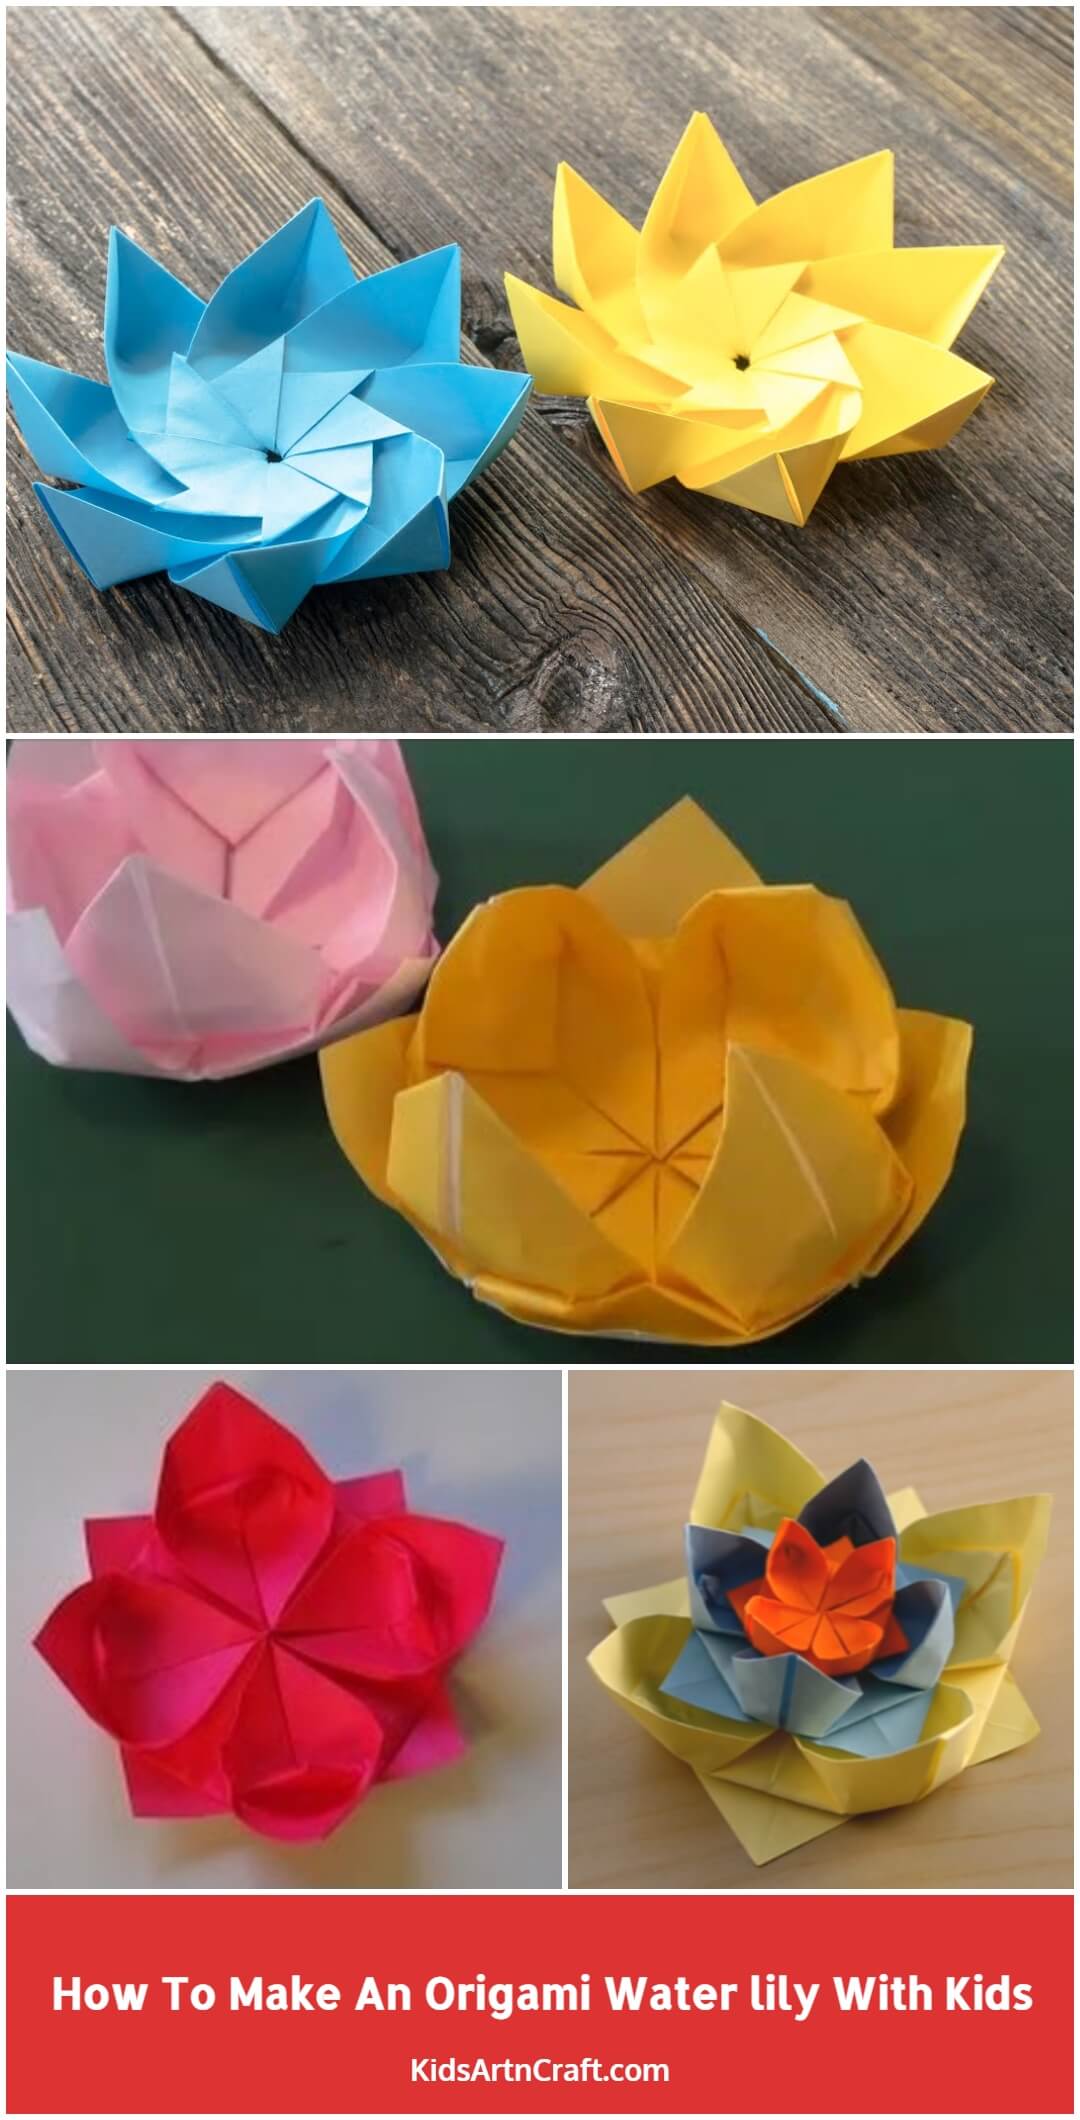 How To Make An Origami Water lily With Kids